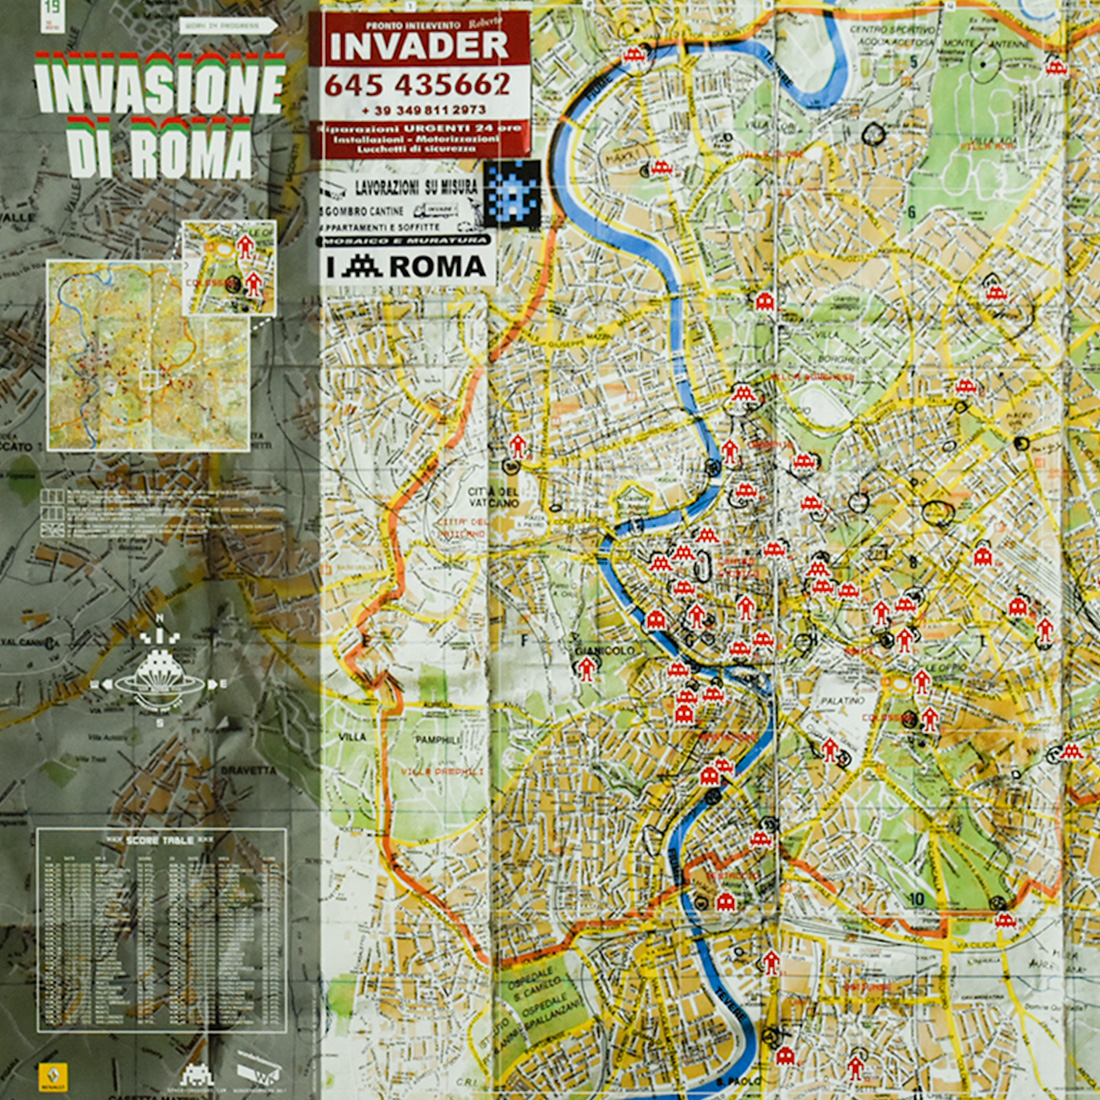 invader invasione di roma rome map signed print showing left side